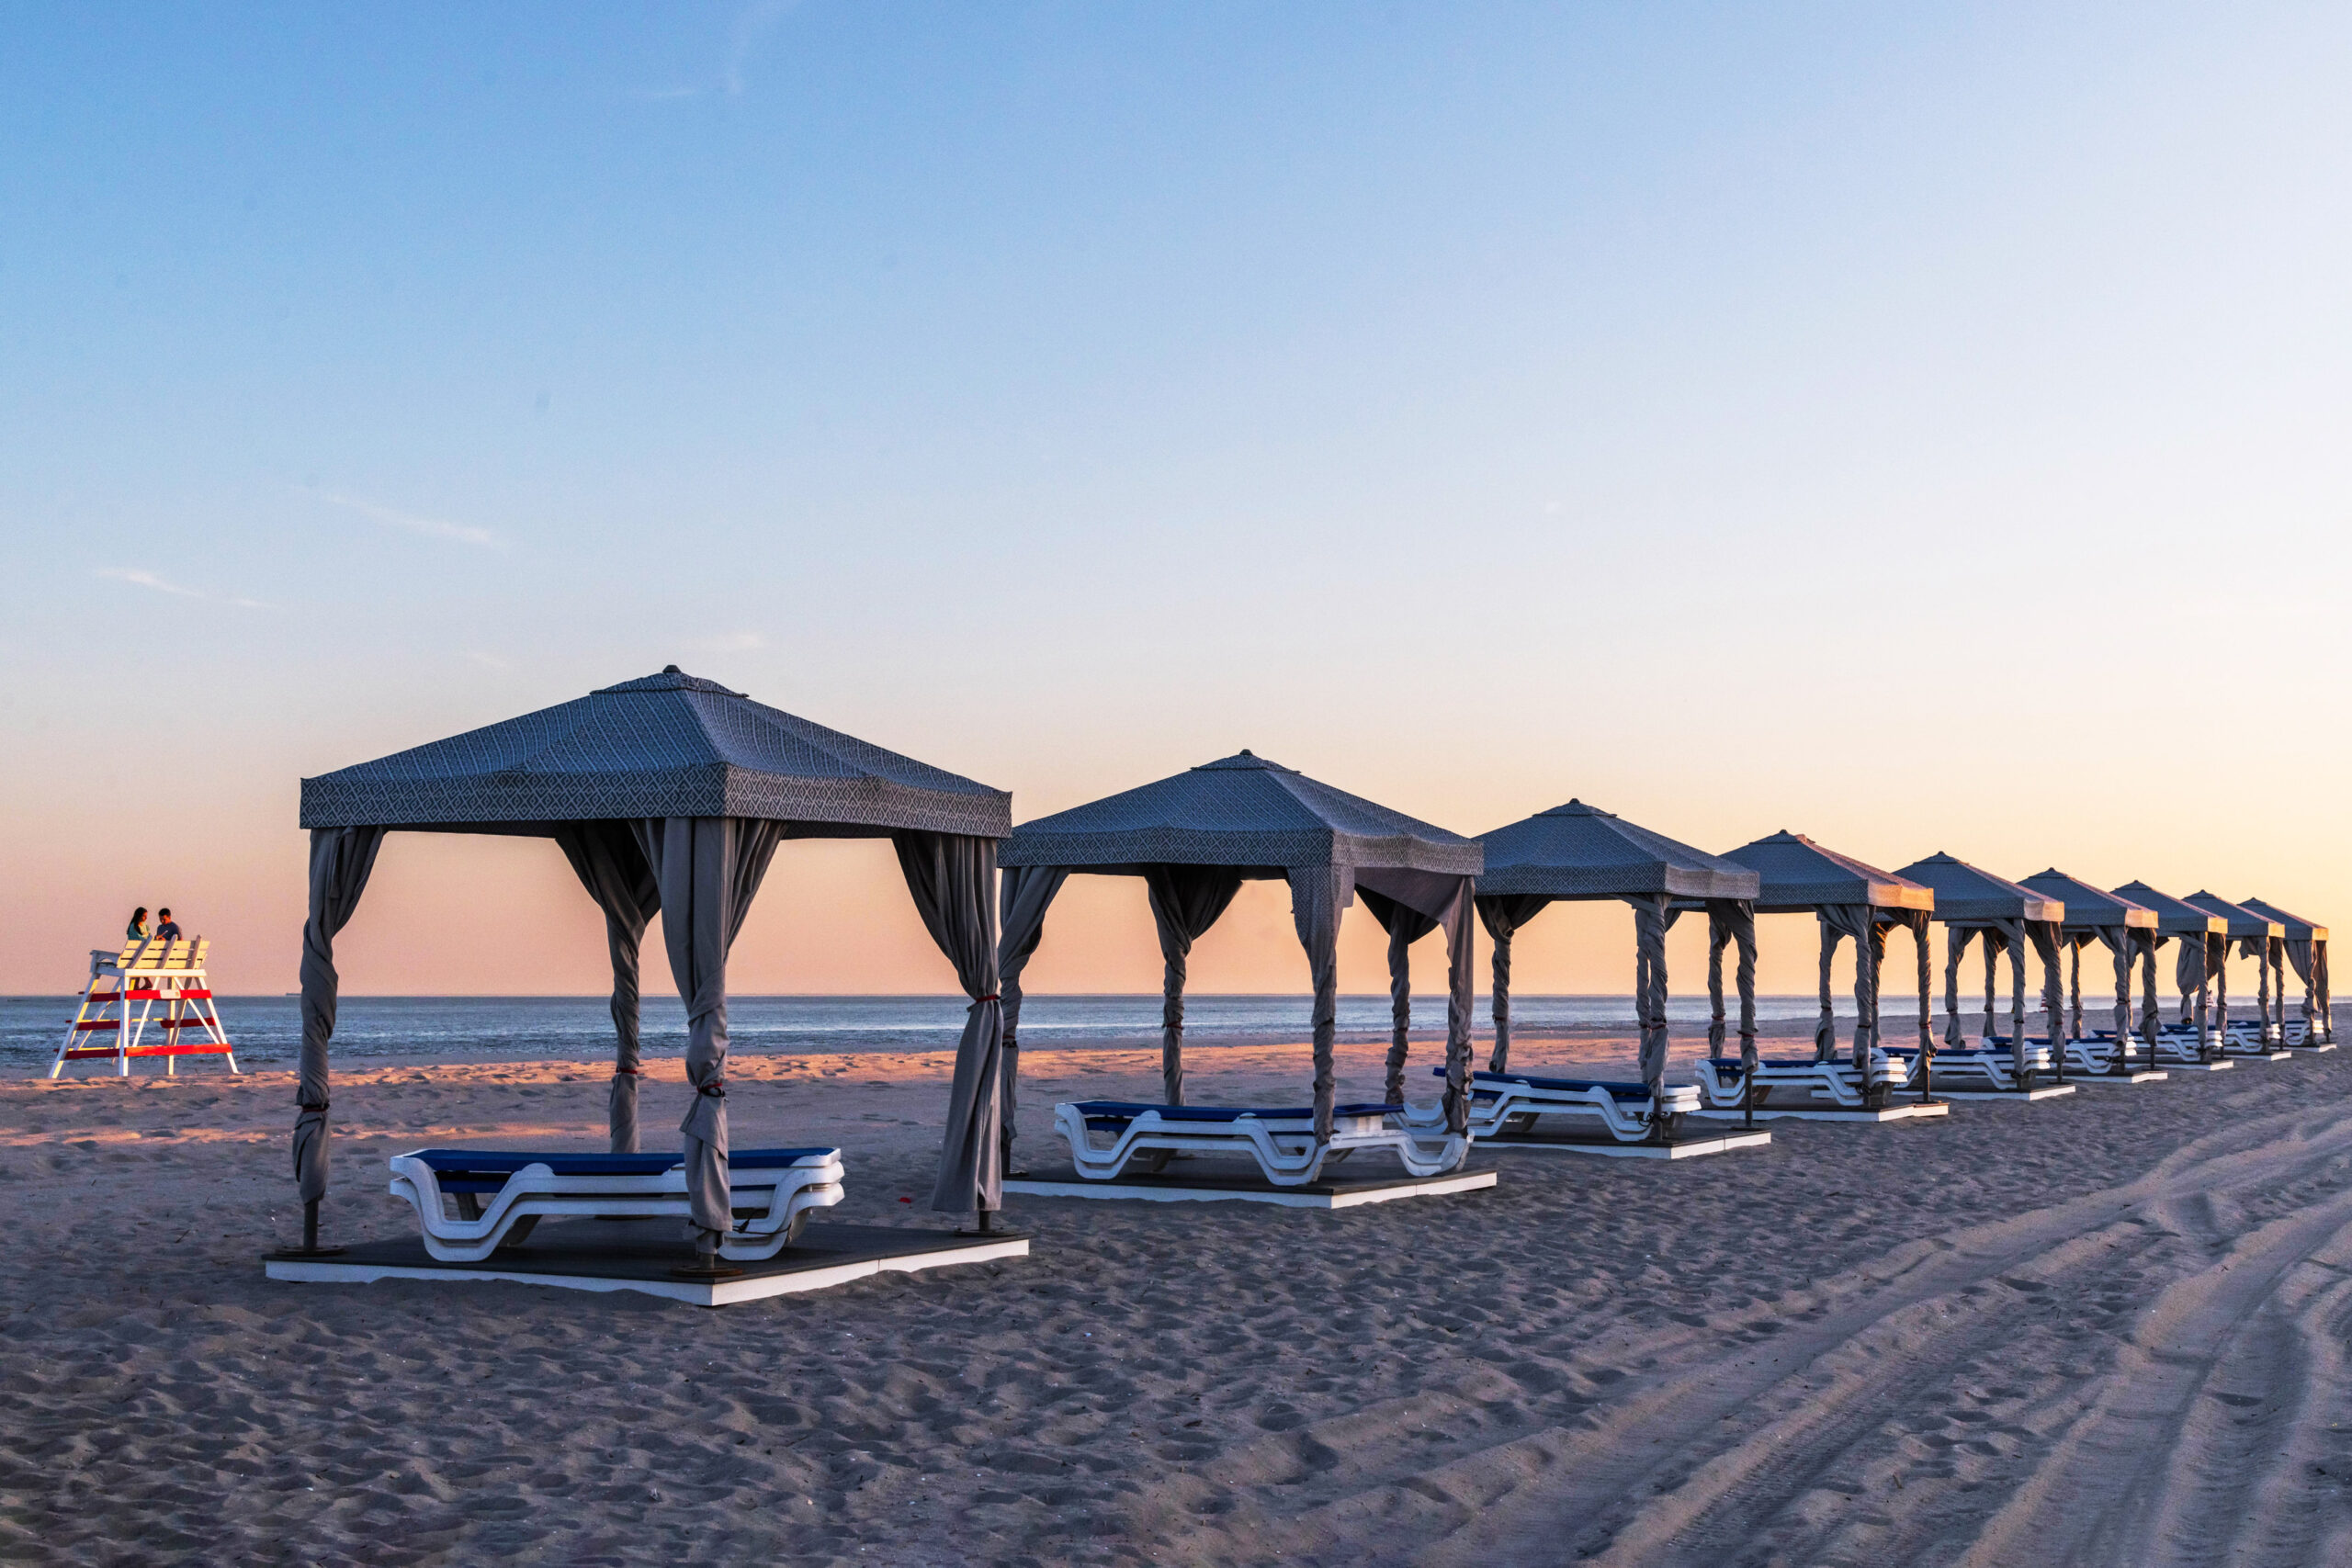 A row of empty beach cabanas at sunset on the beach. There are two people sitting on a Cape May lifeguard stand in the background.